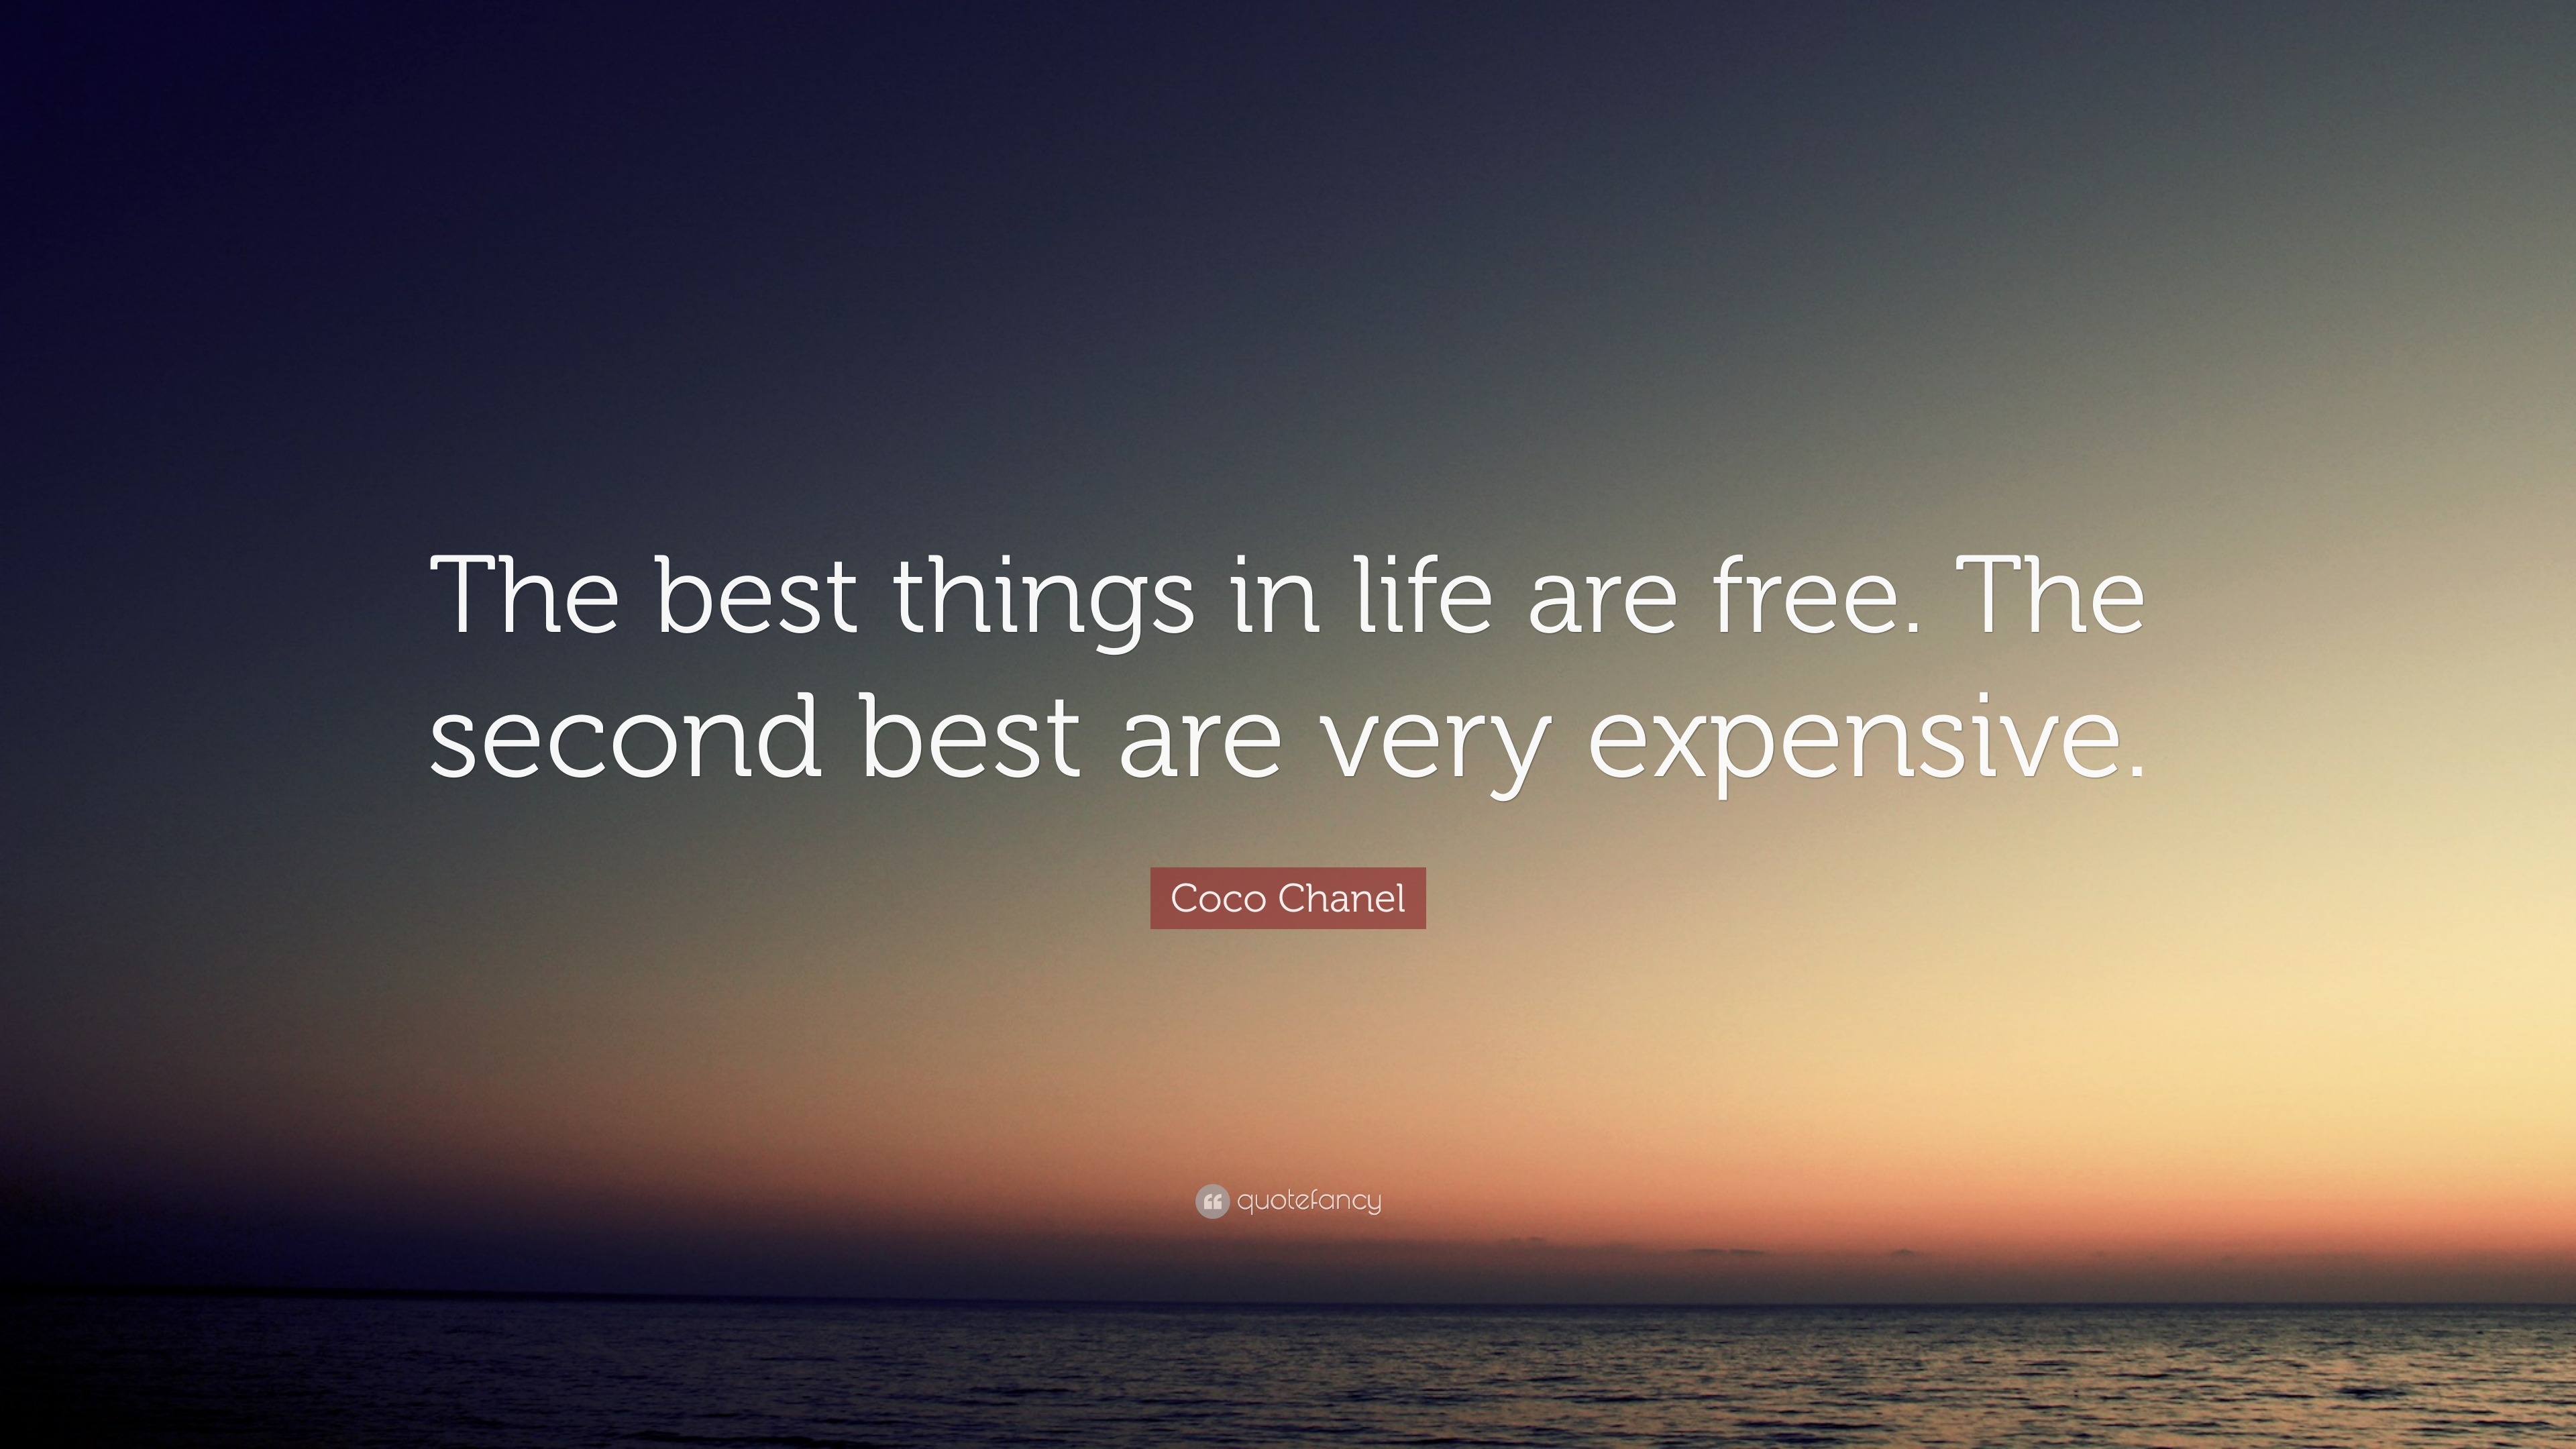 Chanel - the best things in life are FREE The second best are very